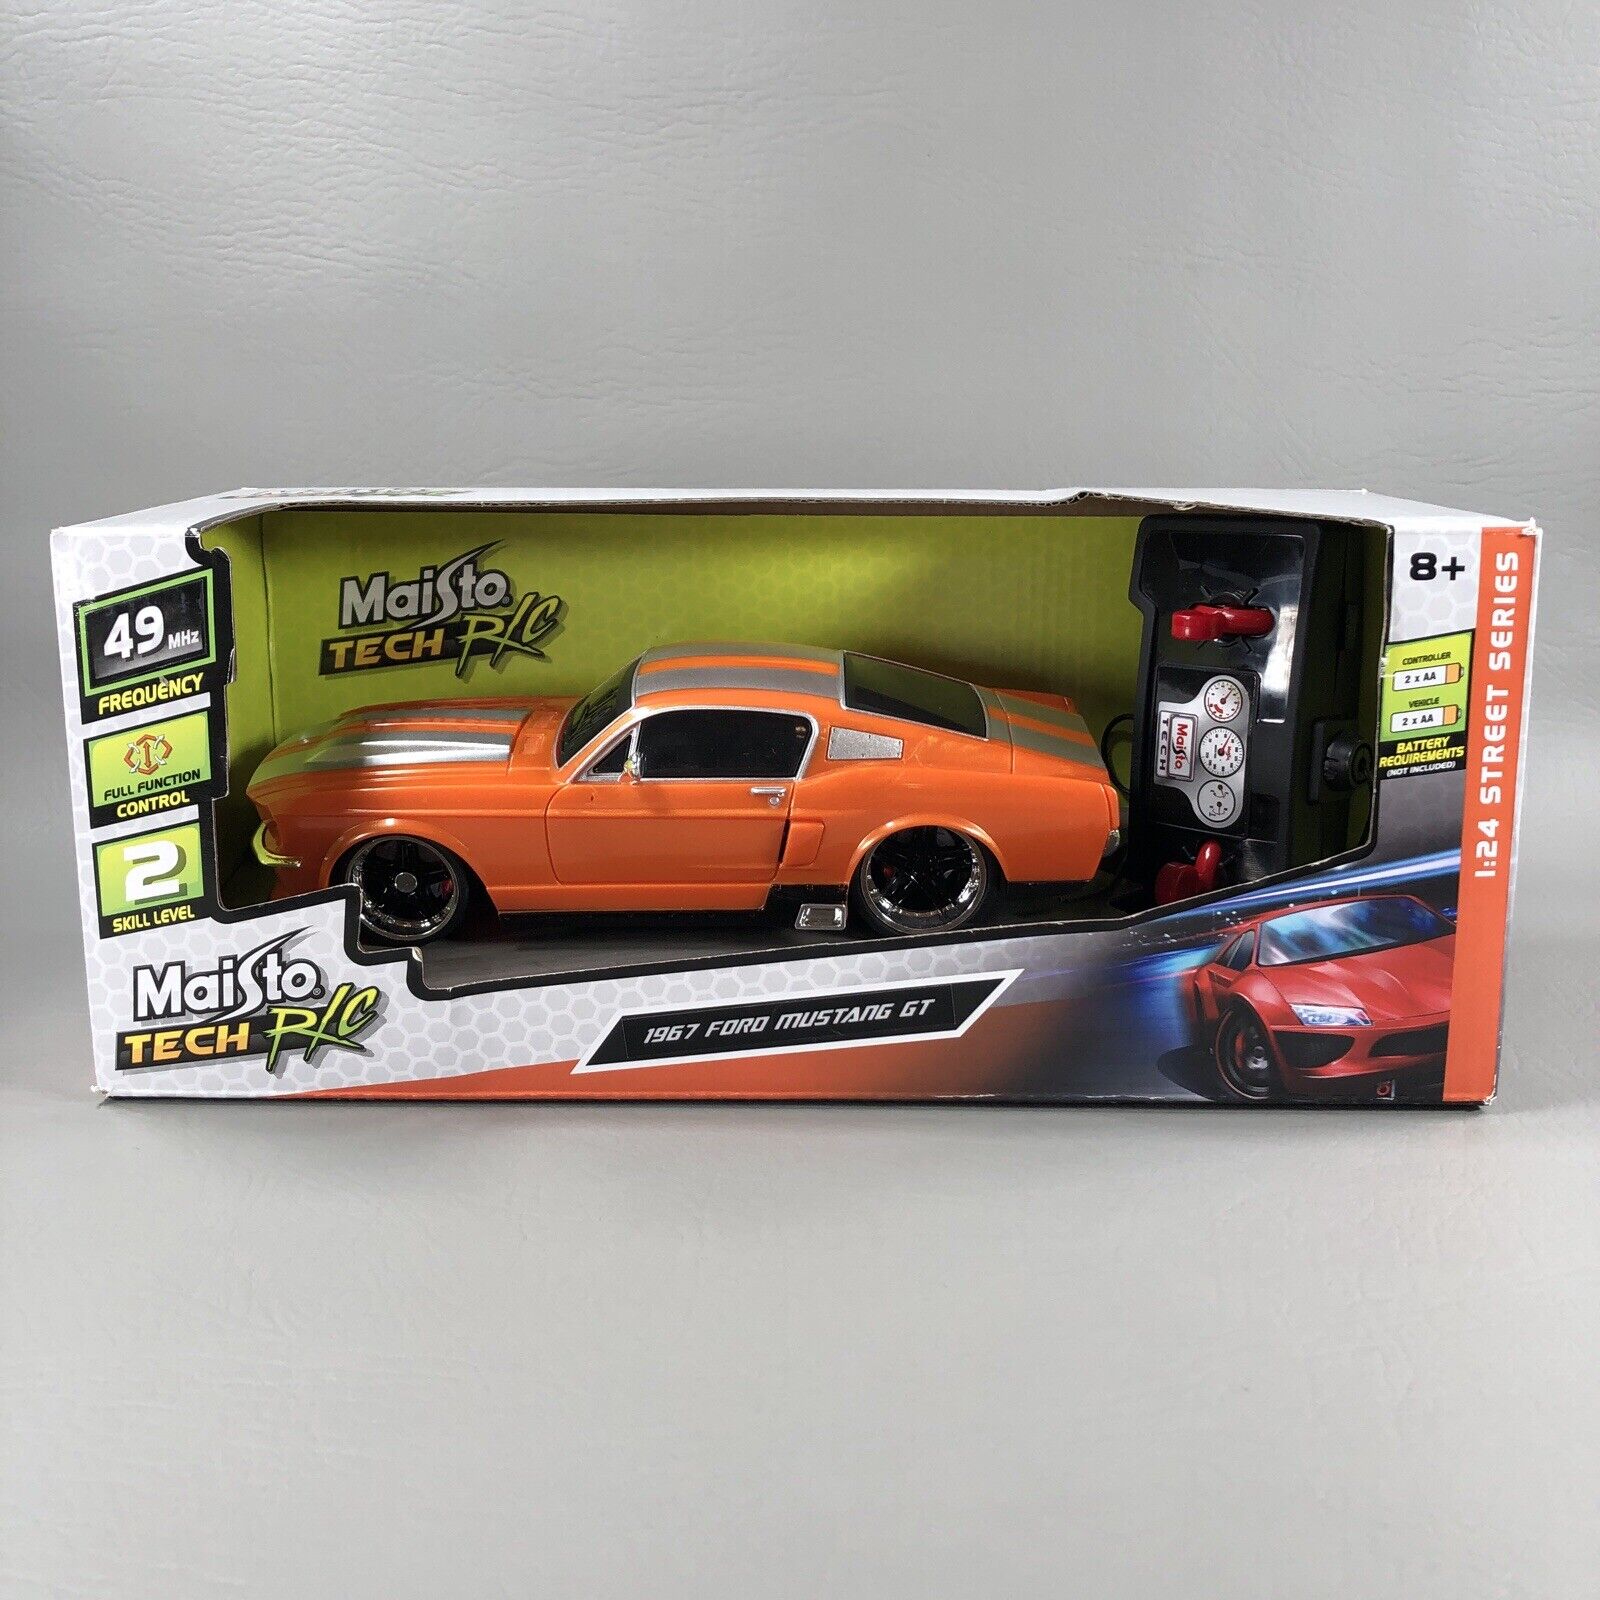 Maisto Tech RC 1967 FORD MUSTANG GT 1:24 Scale Batteries Required